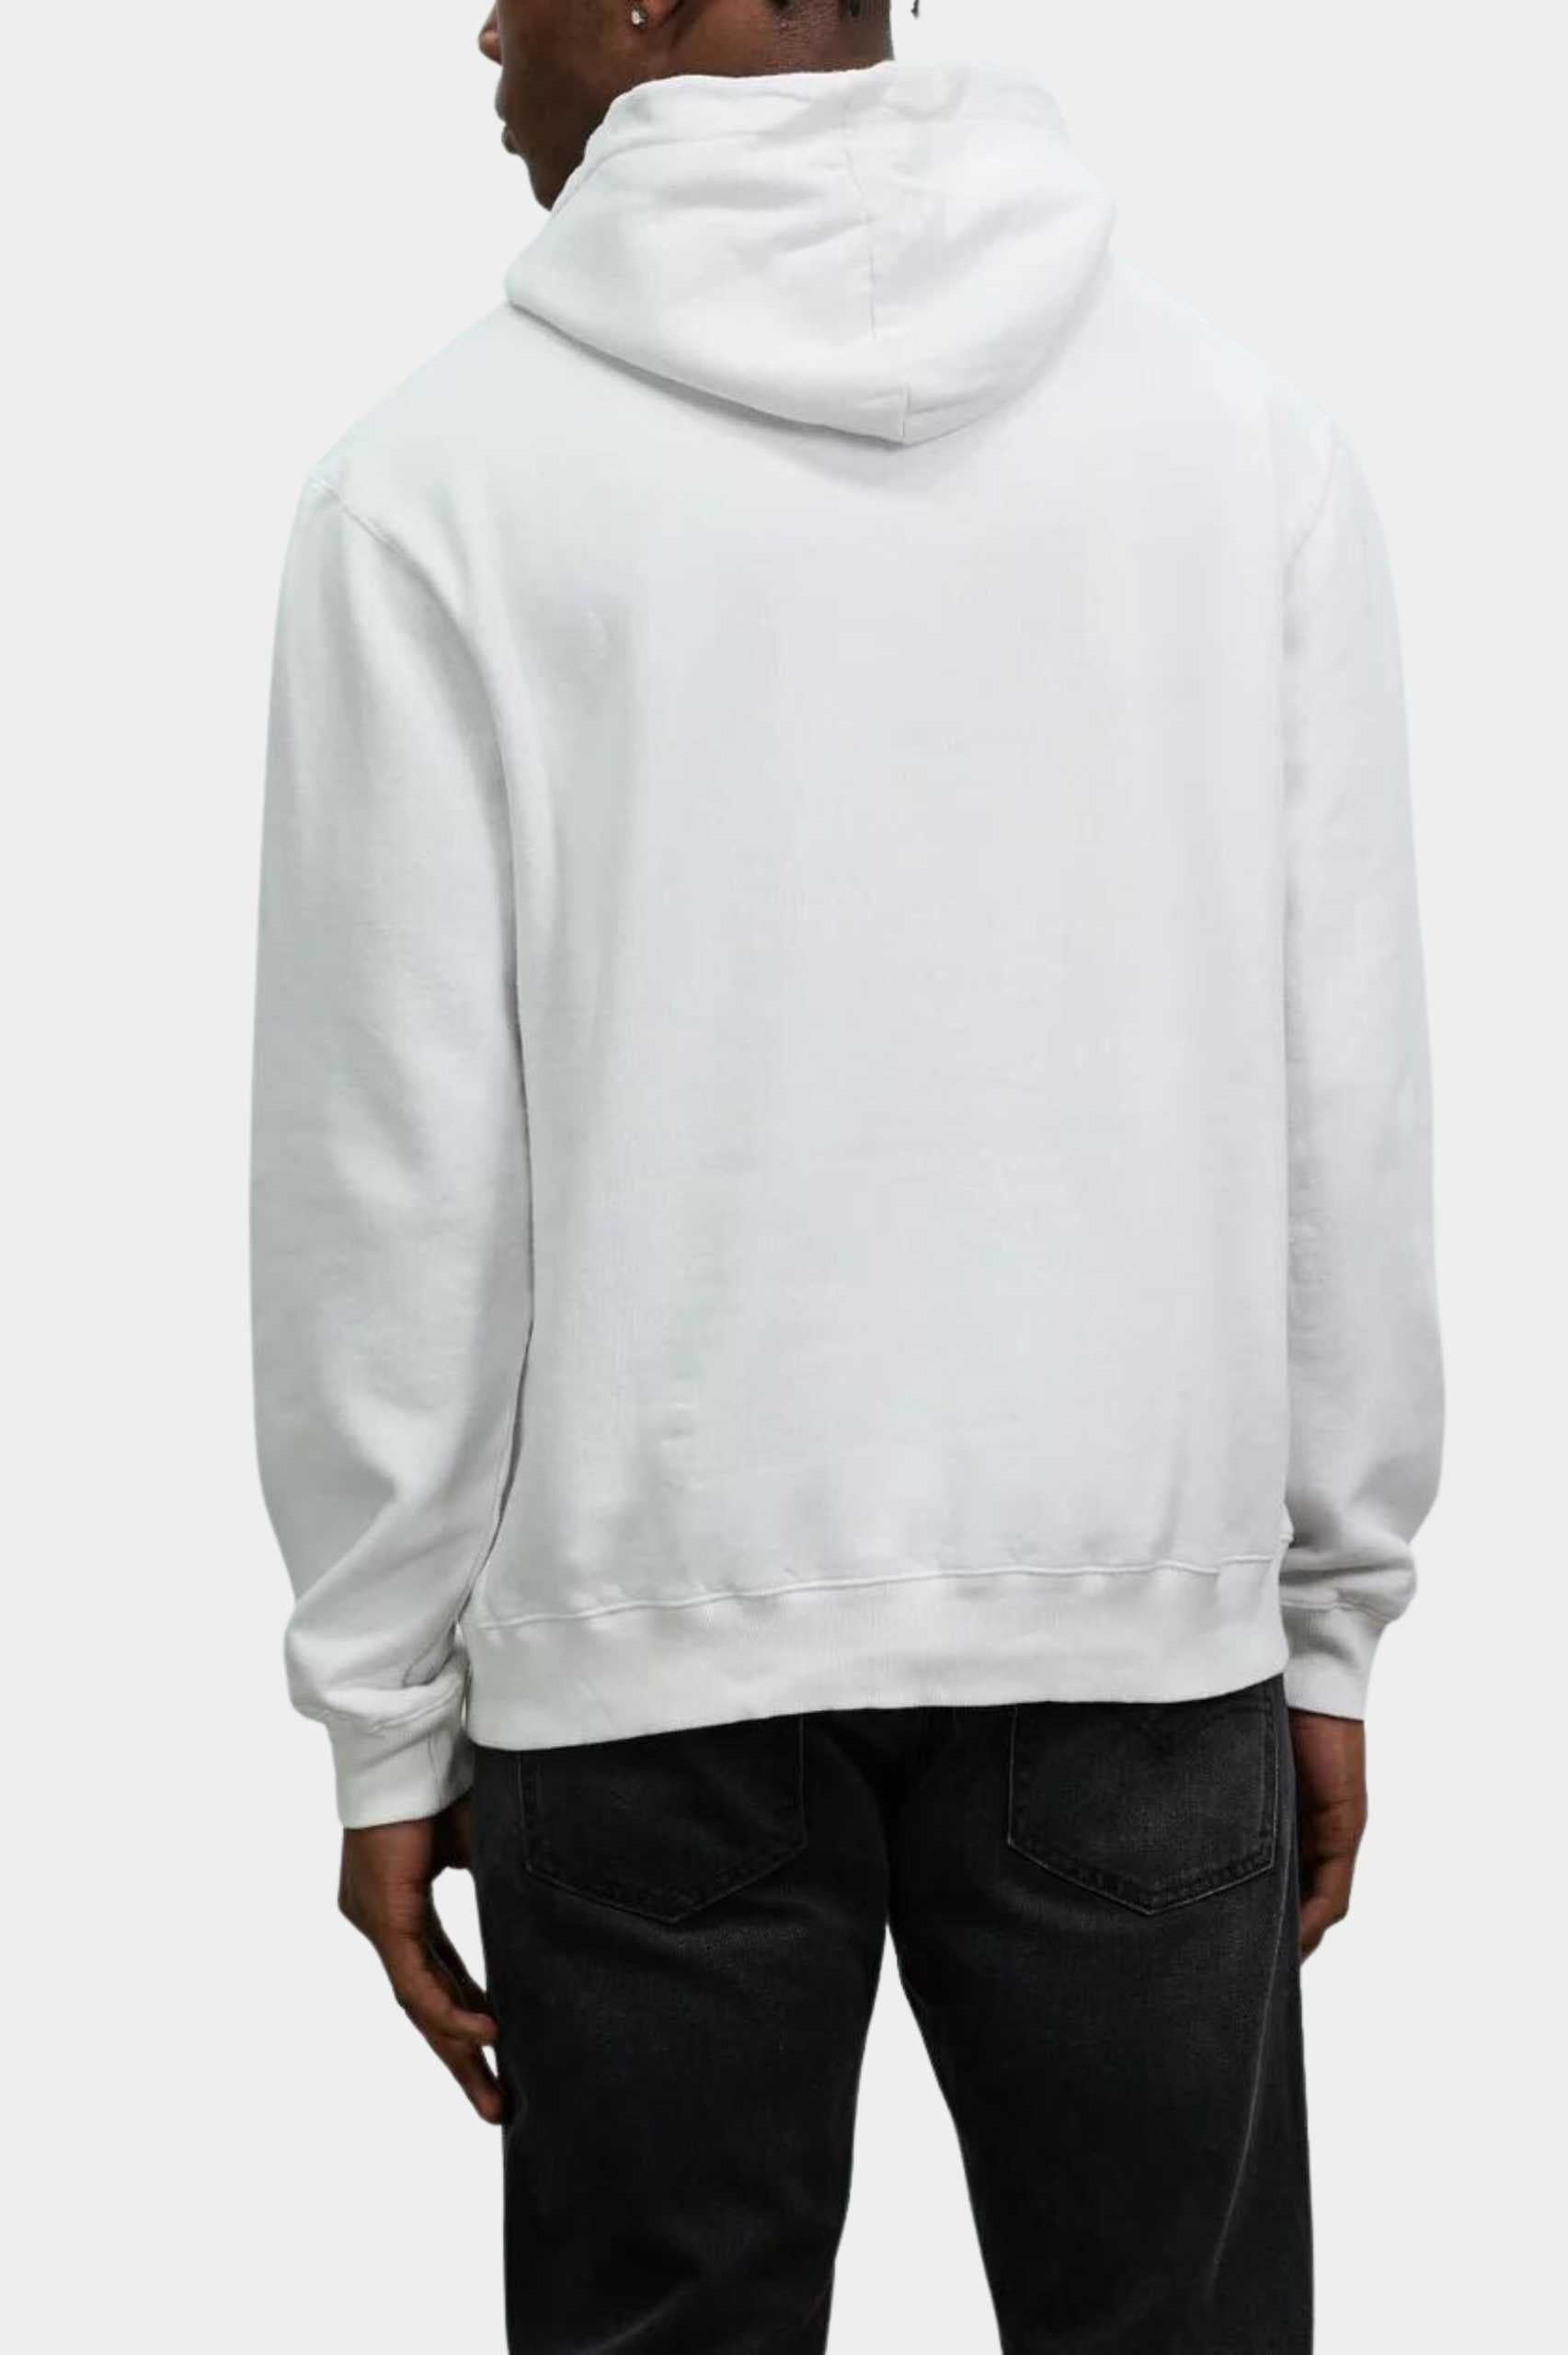 Rolla's Rolling Stone Hoodie in White